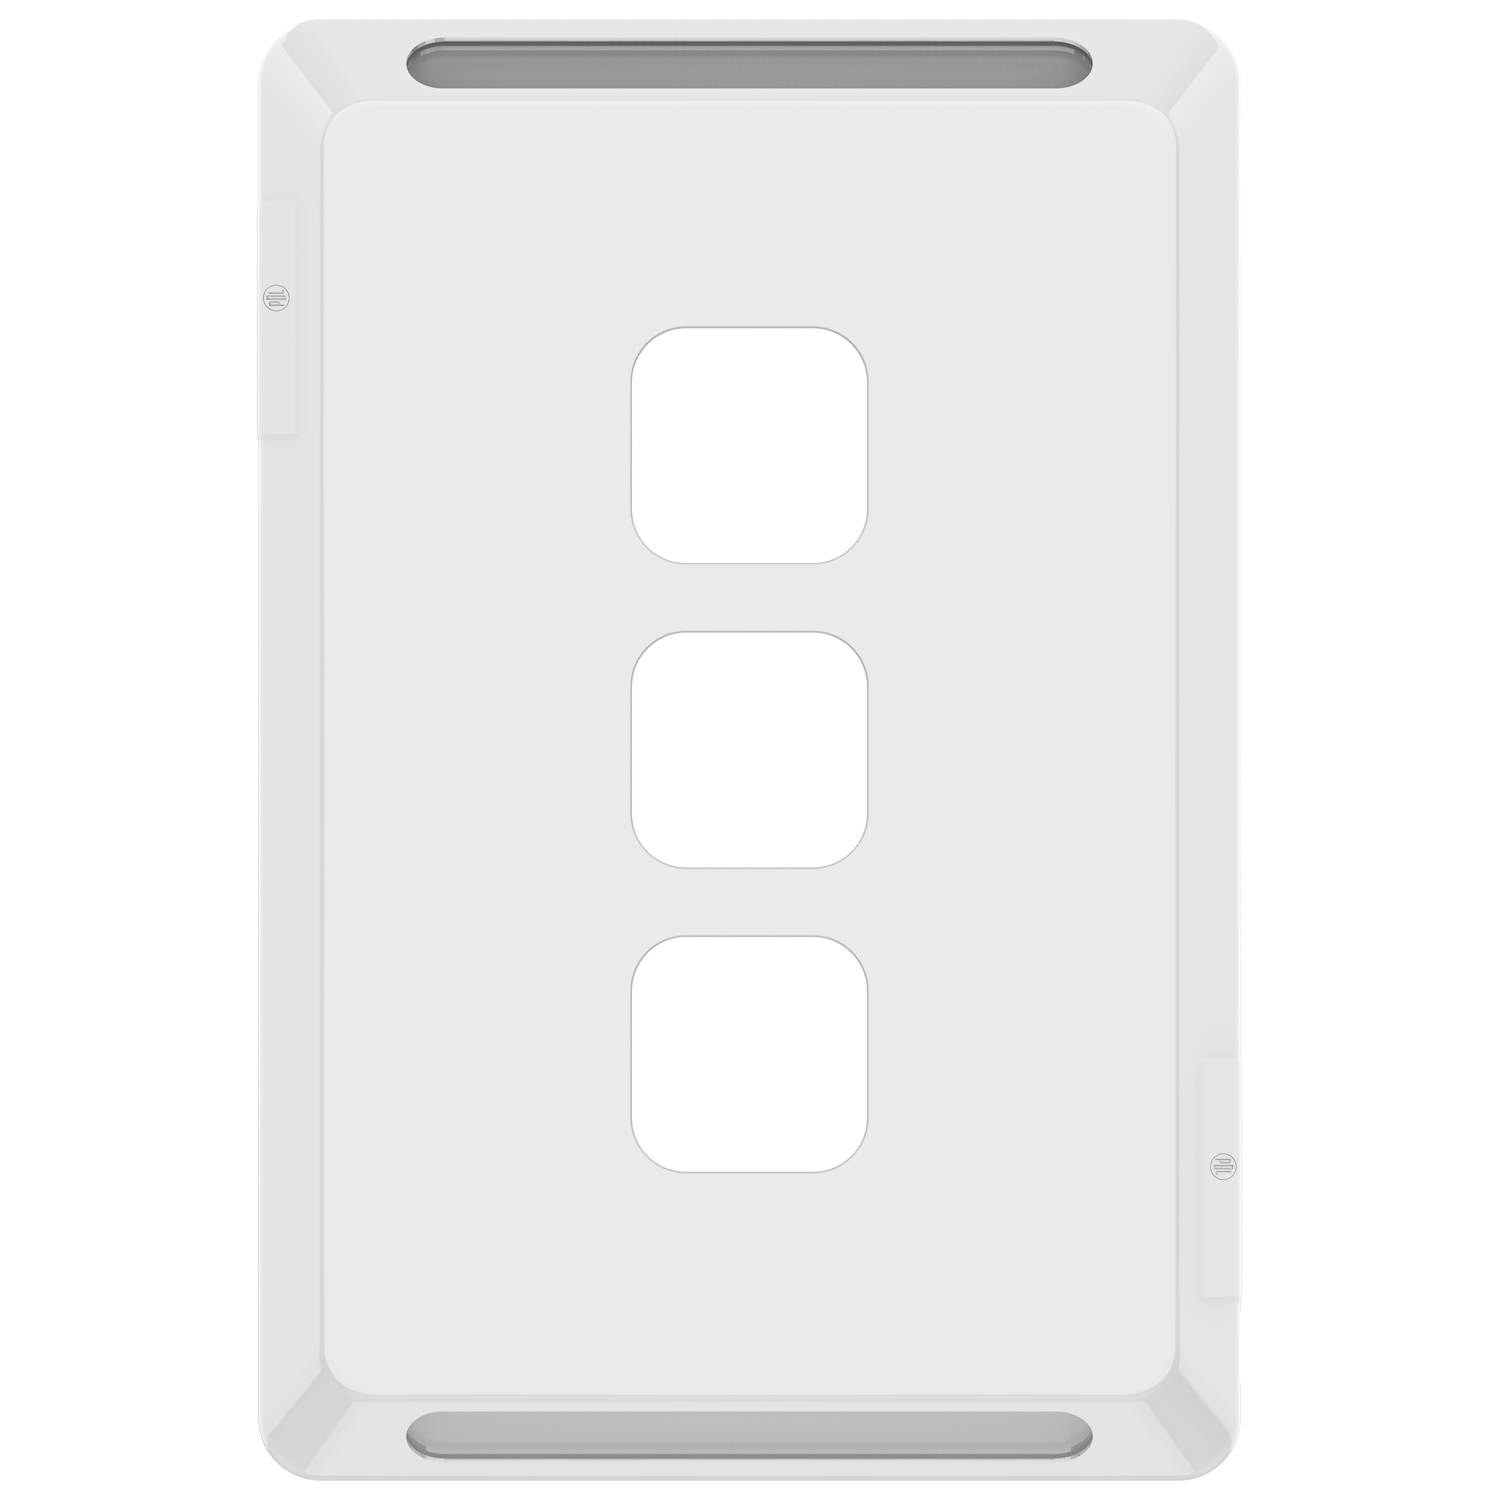 PDL Pro Series - Grid + Cover Plate Switch 3-Gang - White